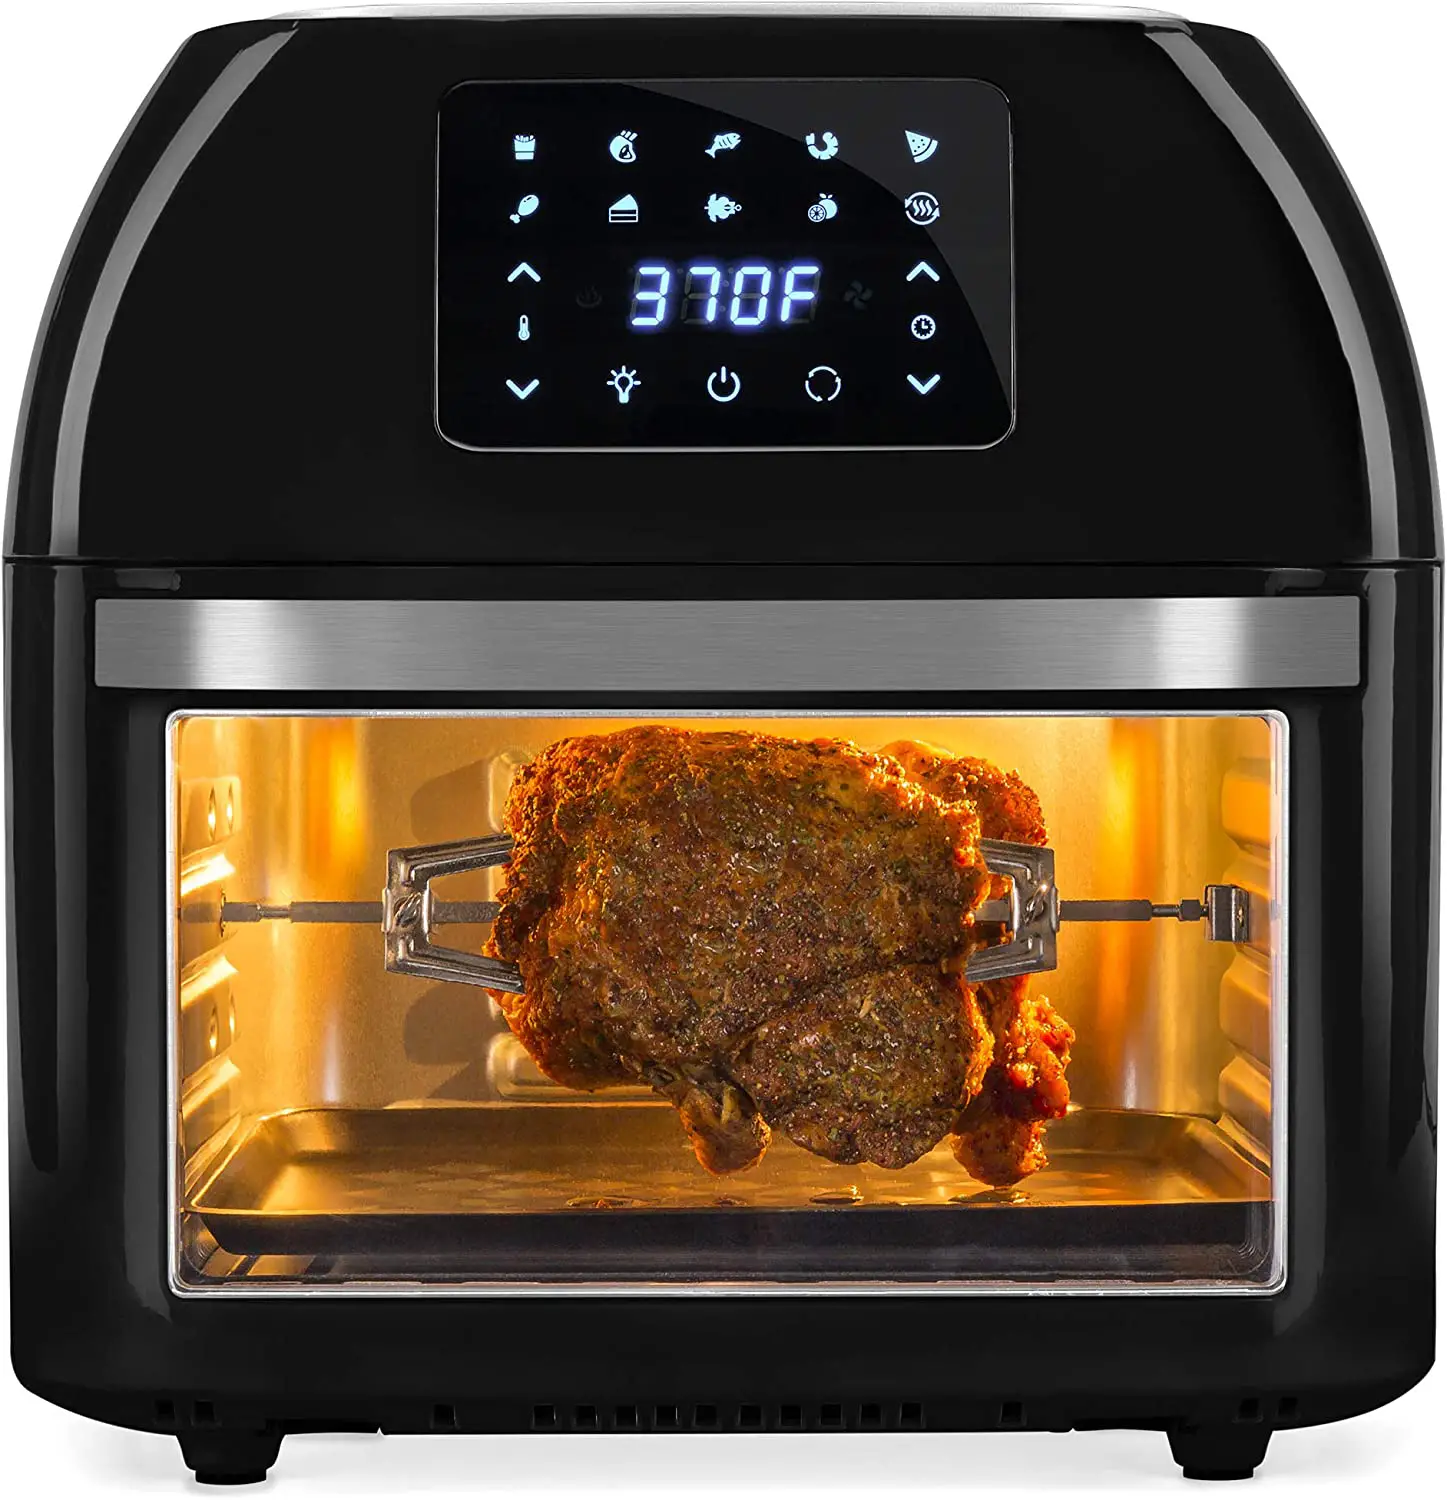 Best Air Fryer With Rotisserie That Will Roast a Whole Chicken